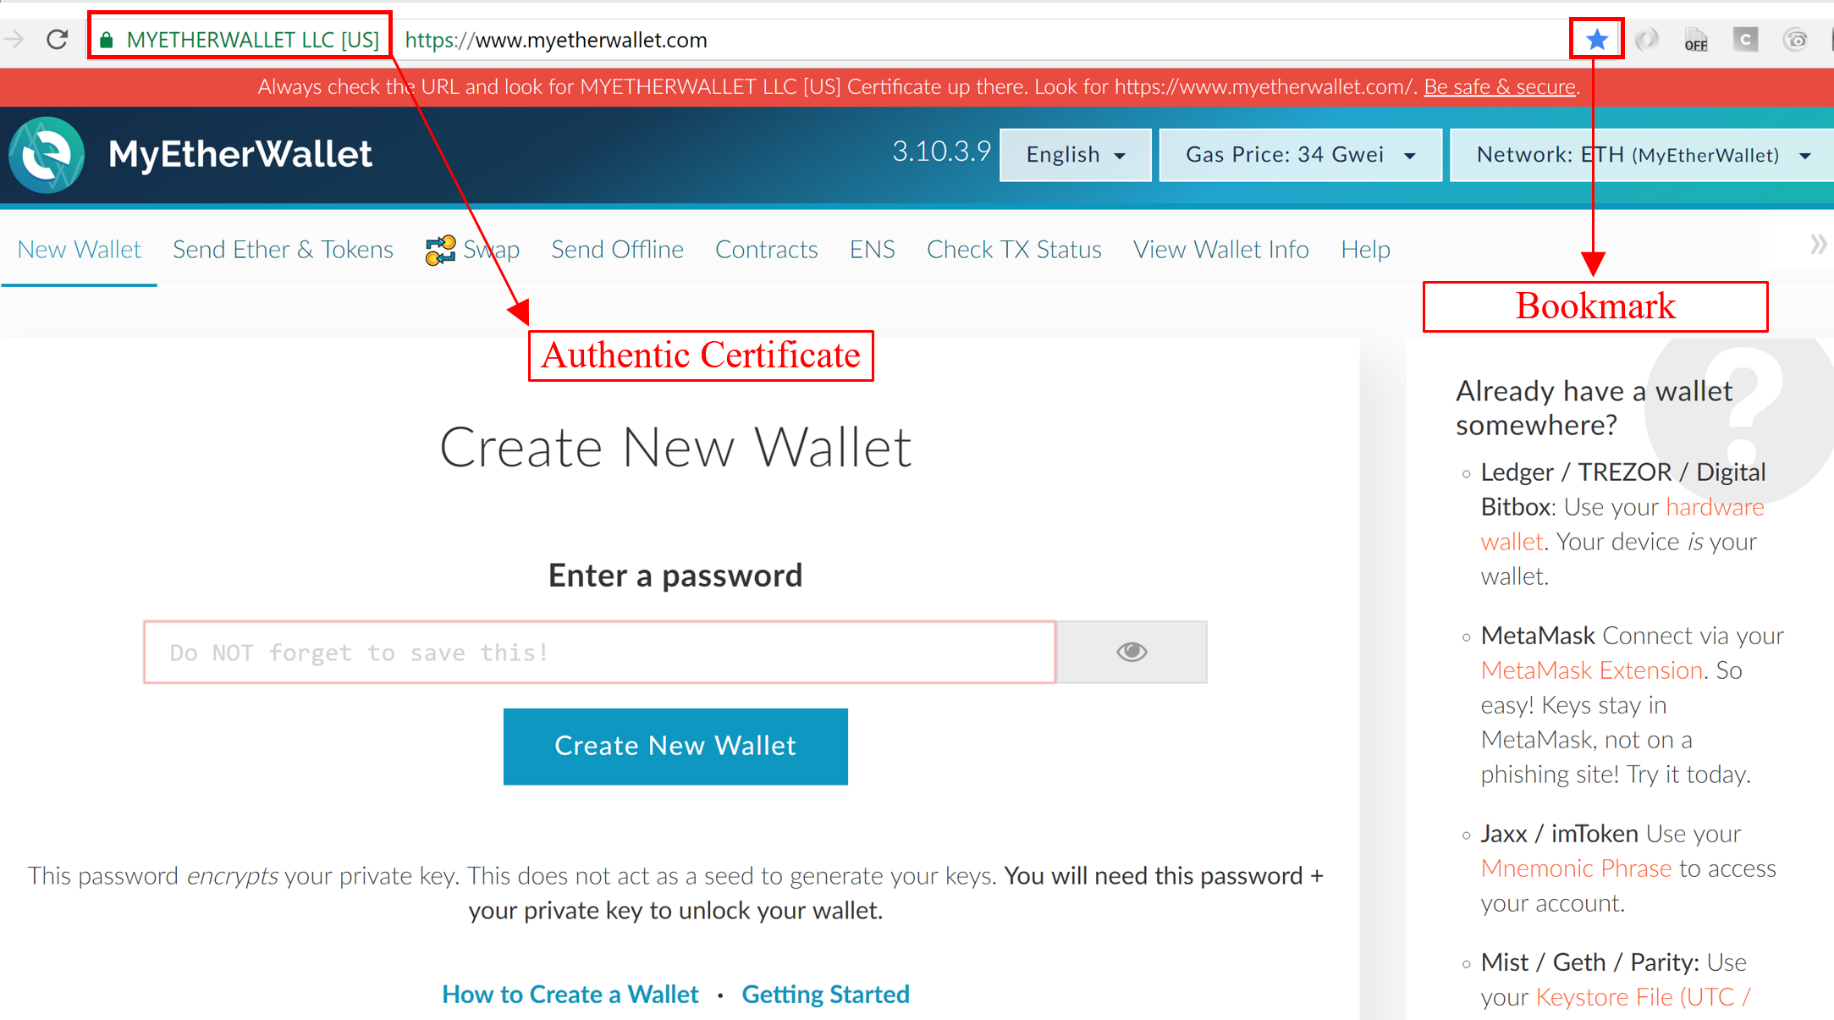 Guide to Cryptocurrency Wallets: Opening a MyEtherWallet (MEW) Wallet